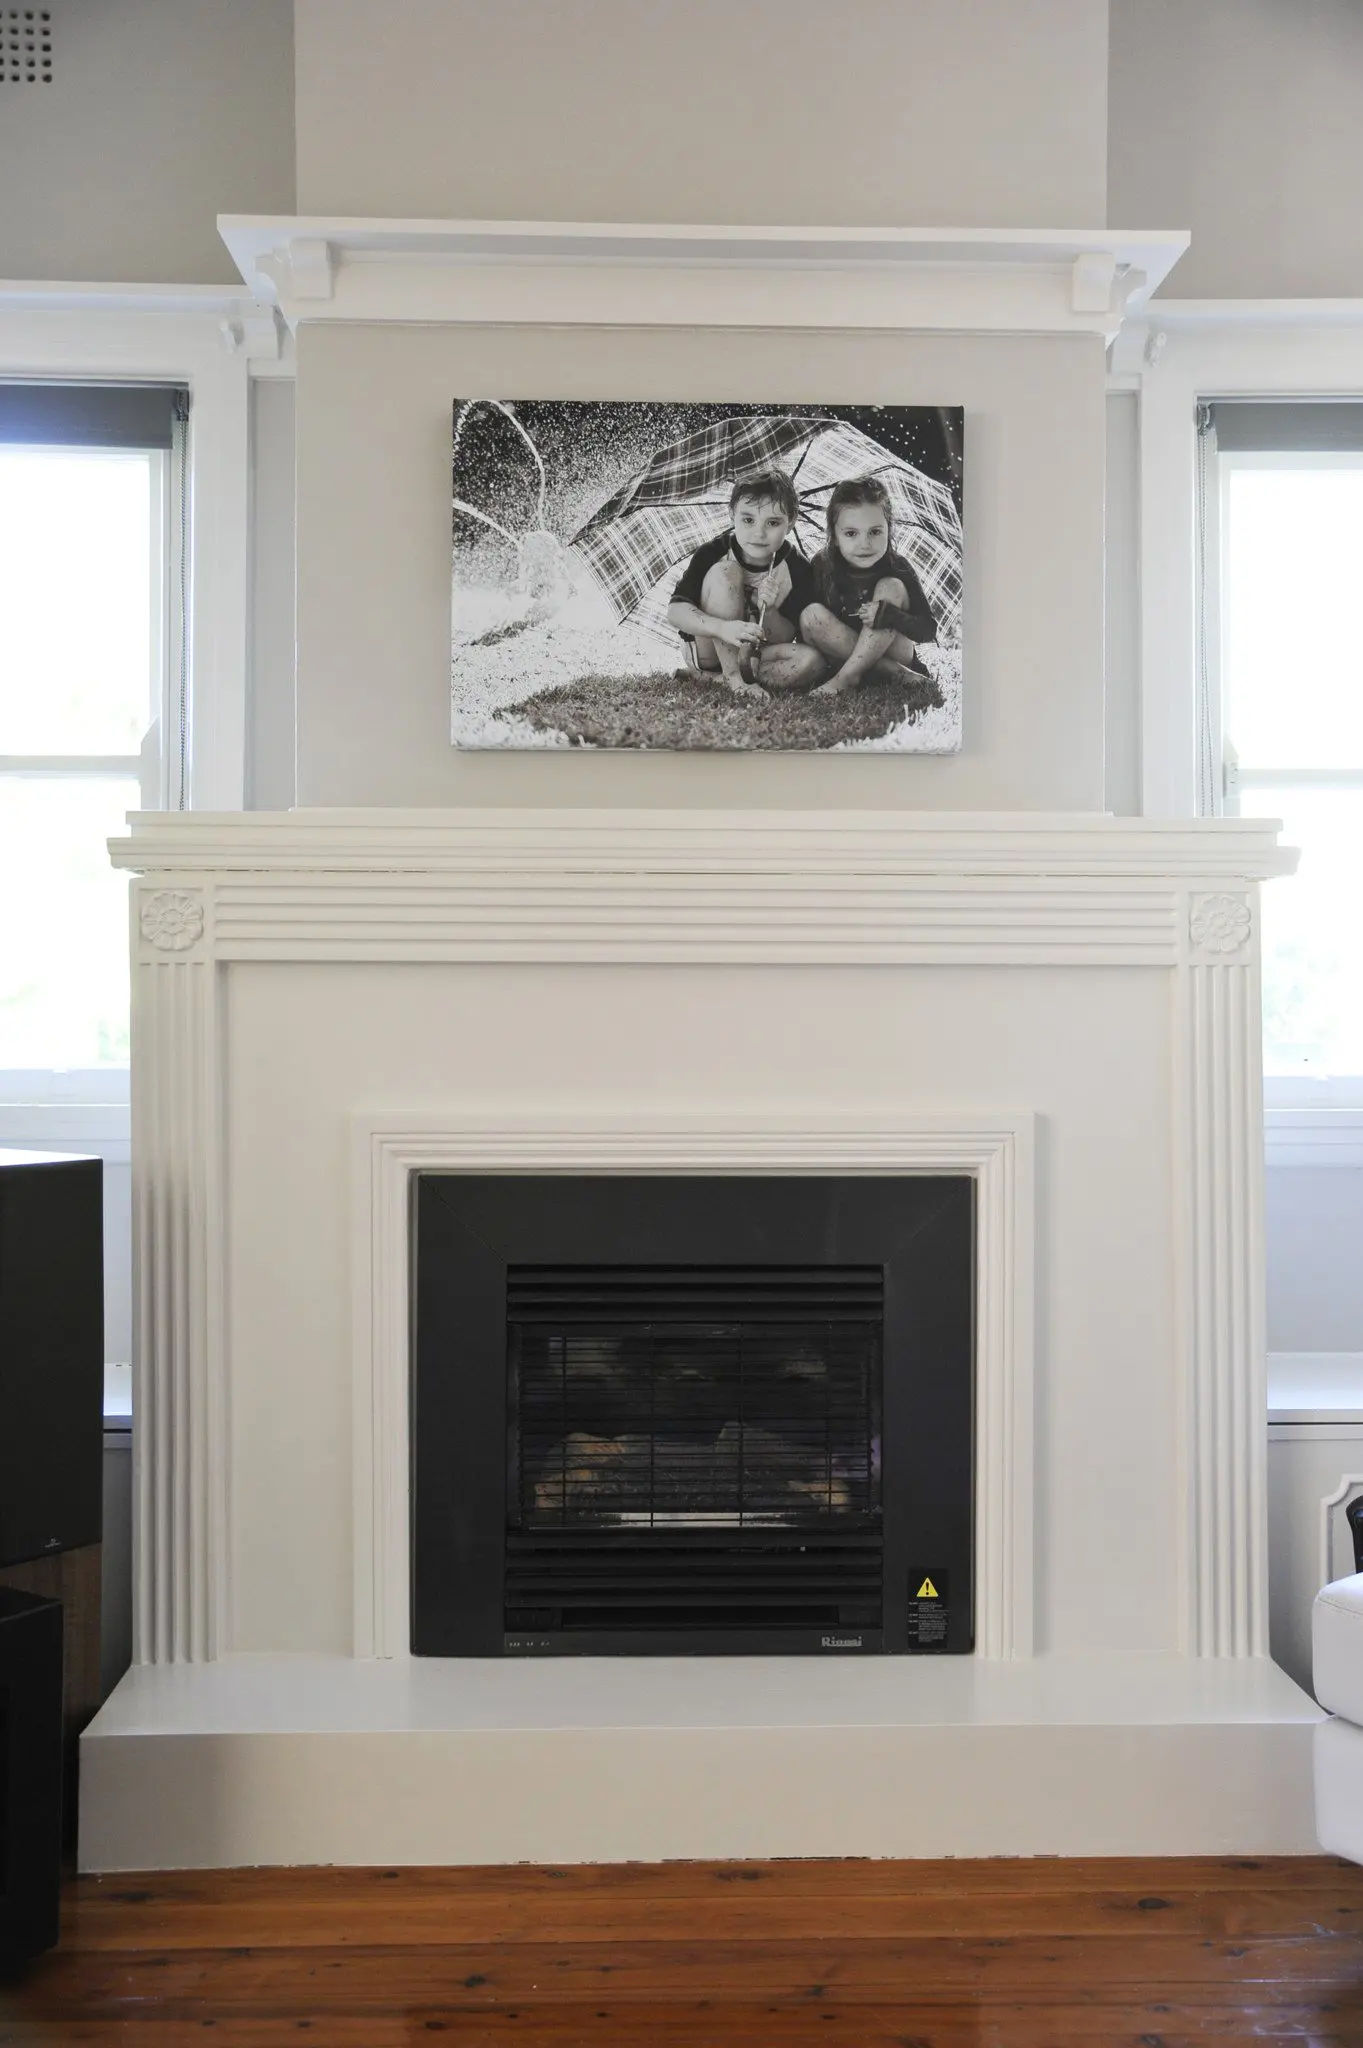 Example of contemporary style fireplace